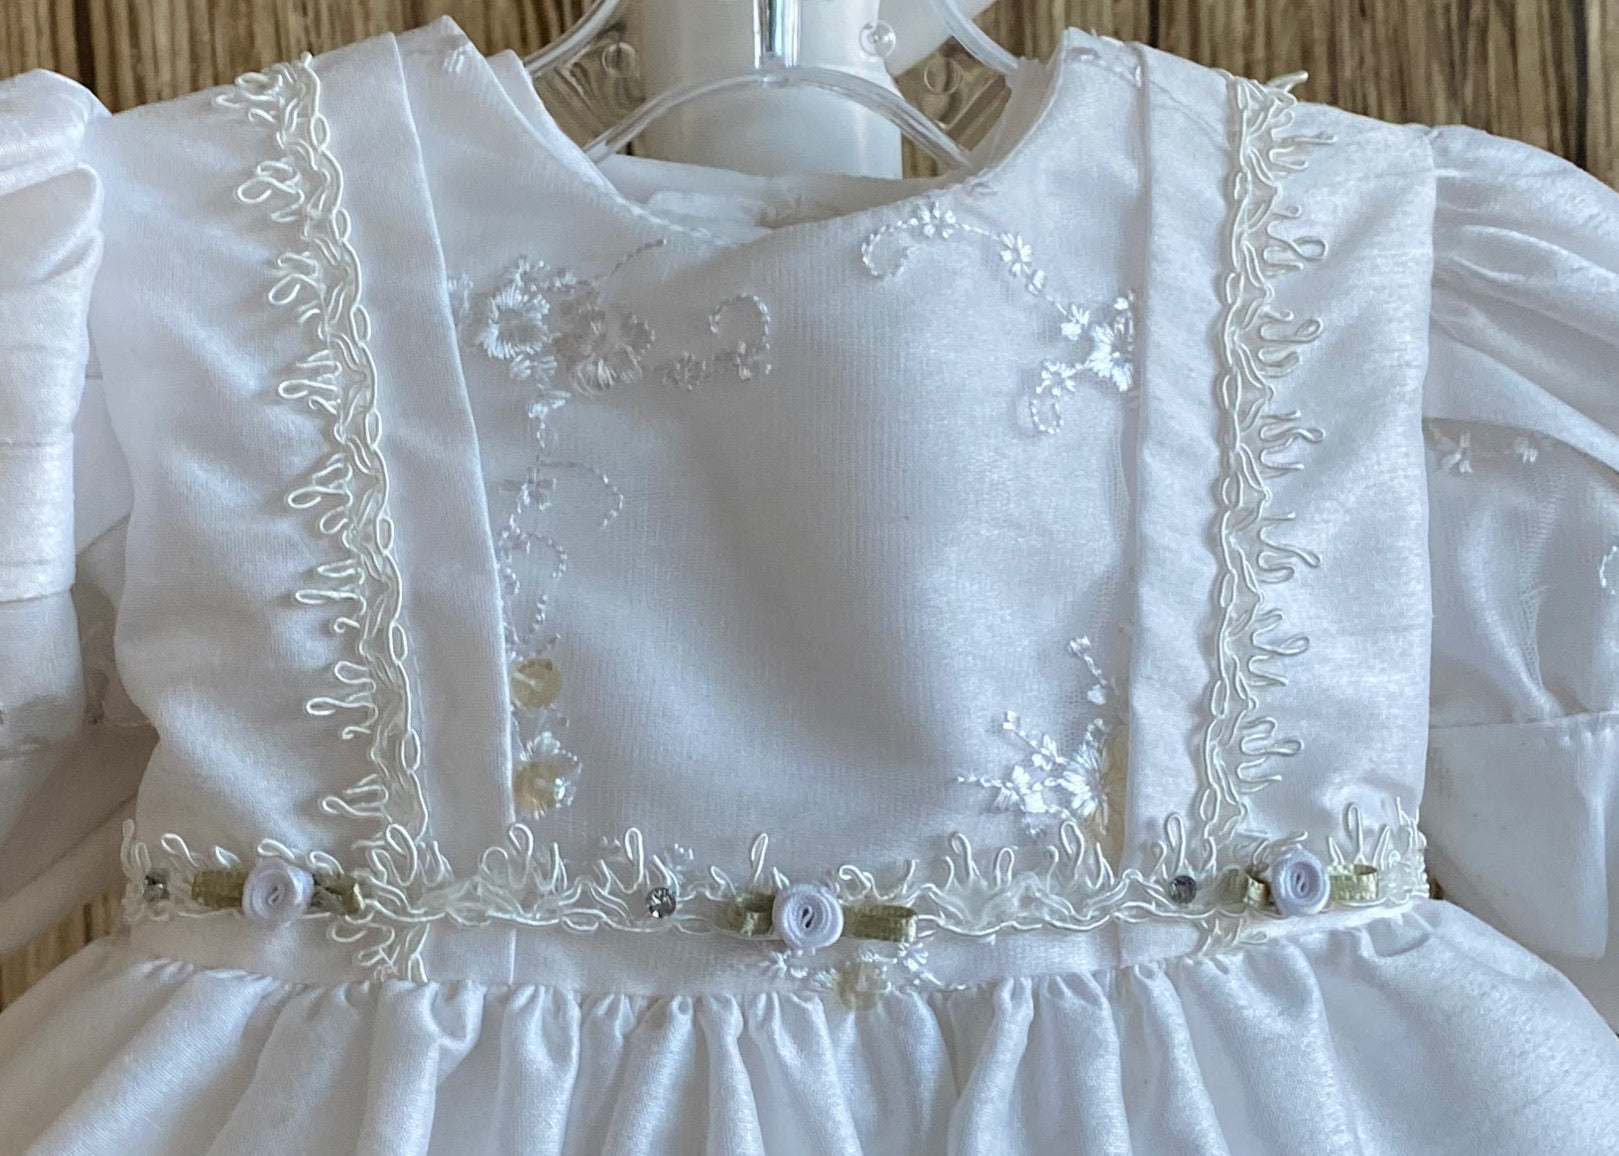 This a beautiful, one-of-a-kind baptism gown.  A lovely gown for a precious child.  White, size 6M Satin bodice  Embroidered beaded lace detail on bodice and sleeve Embroidered ribboning on bodice Roses placed along bodice edge Gorgeous puffed satin sleeve  Layered skirting  Pleated Lining on bottom for both skirt layers Embroidered beaded lace on edge of both skirt layers  Beautiful matching satin bonnet with lace detailing on brim  Ribbon to tie on bonnet